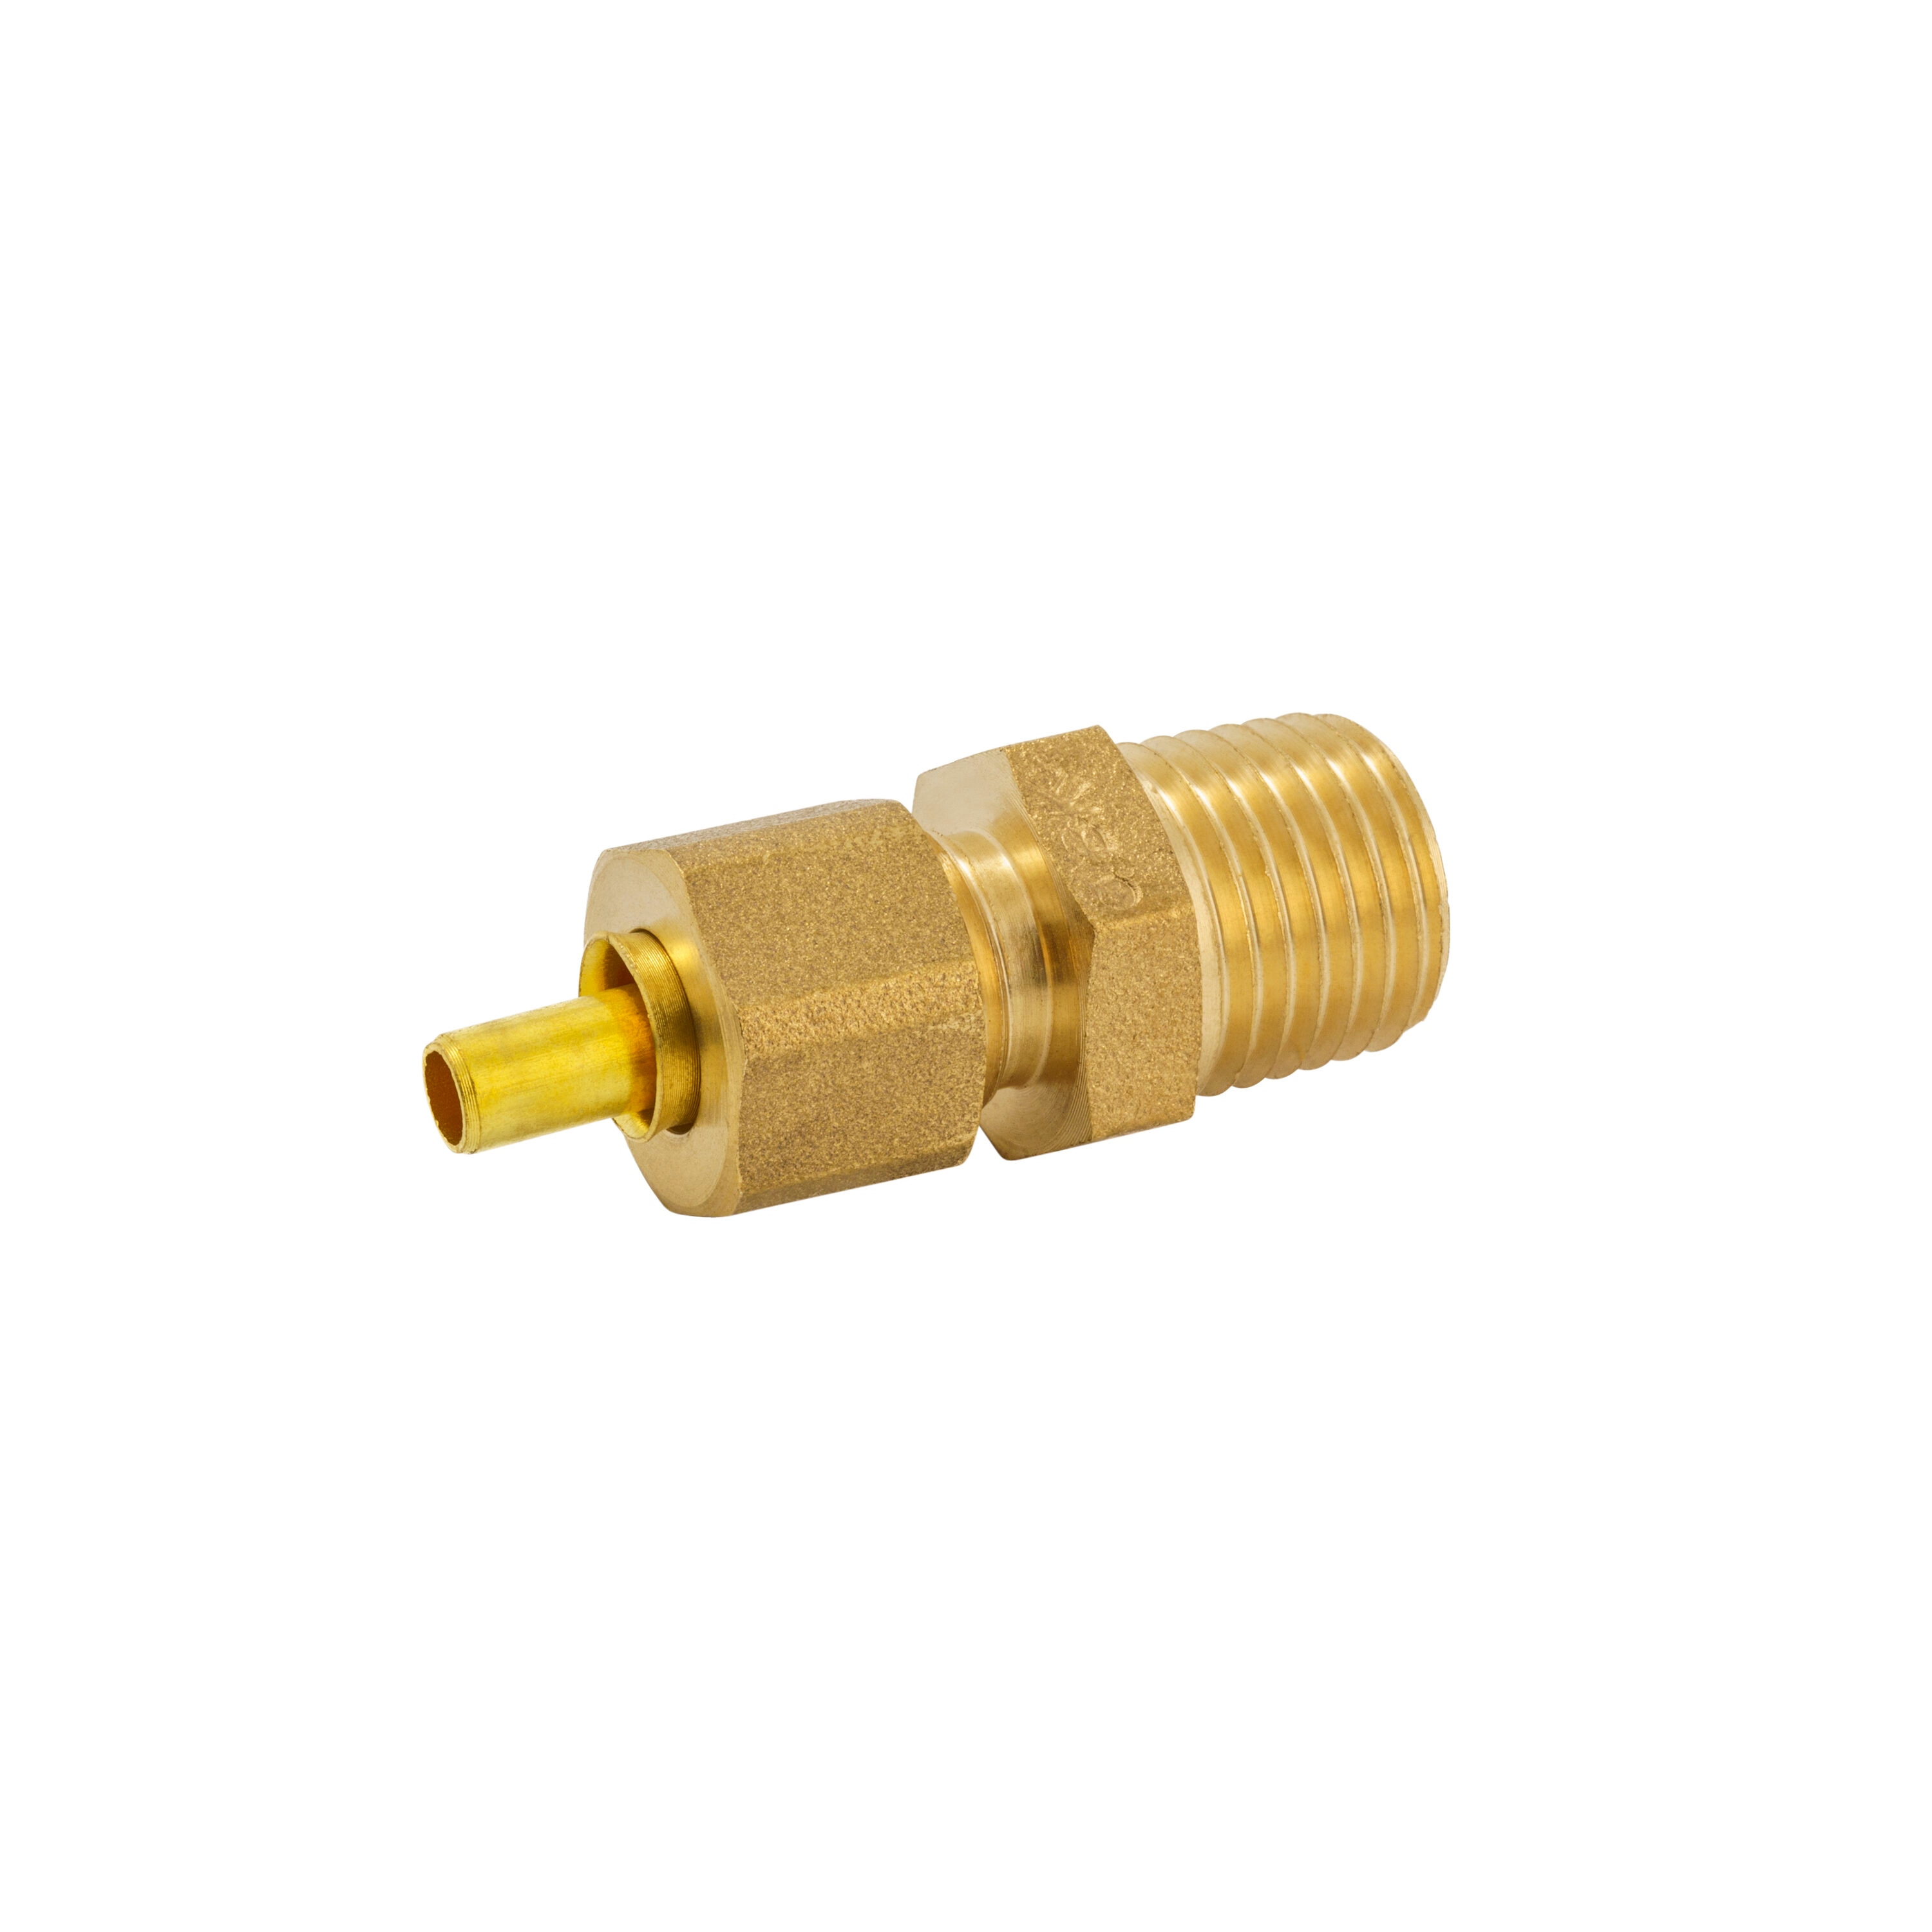 Brass Moody Compression Coupling with 1-Inch Iron Pipe or 1 1/4